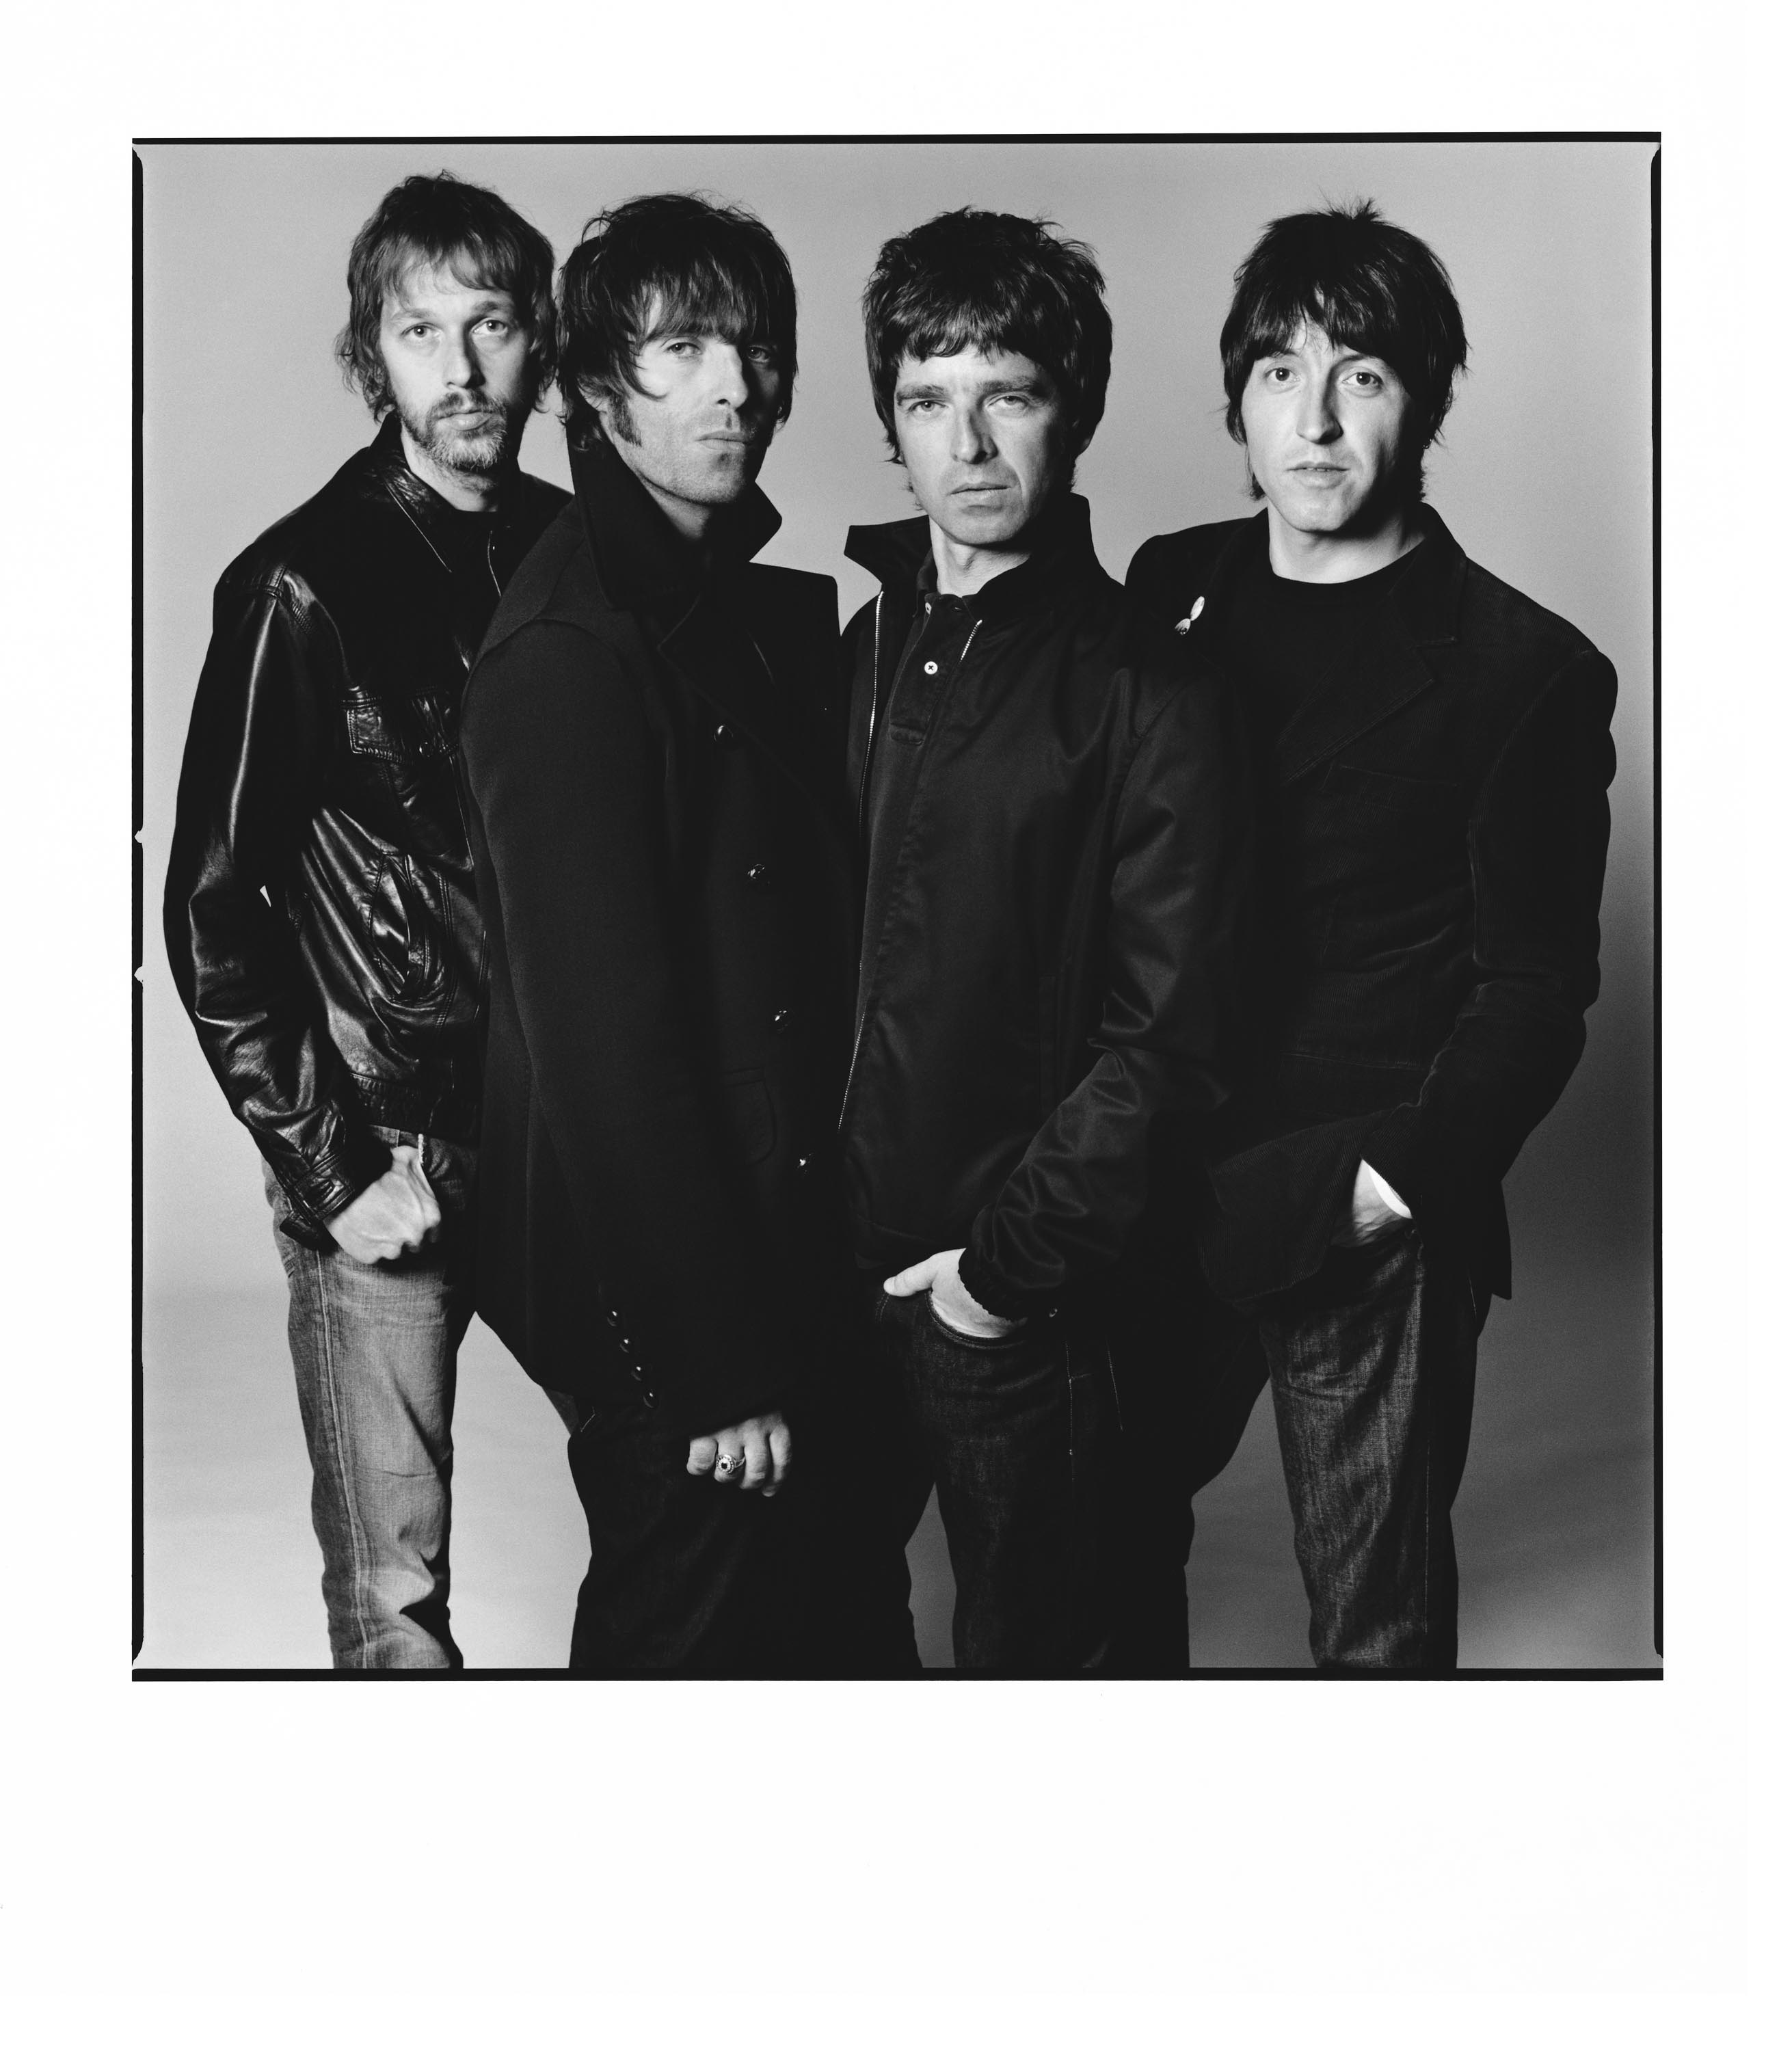 Commitment to Important Matters & Valued Aims with featured Artists: Oasis! Noel Gallagher on Life & Learning...[photo by permission of Sony Music Ent.]